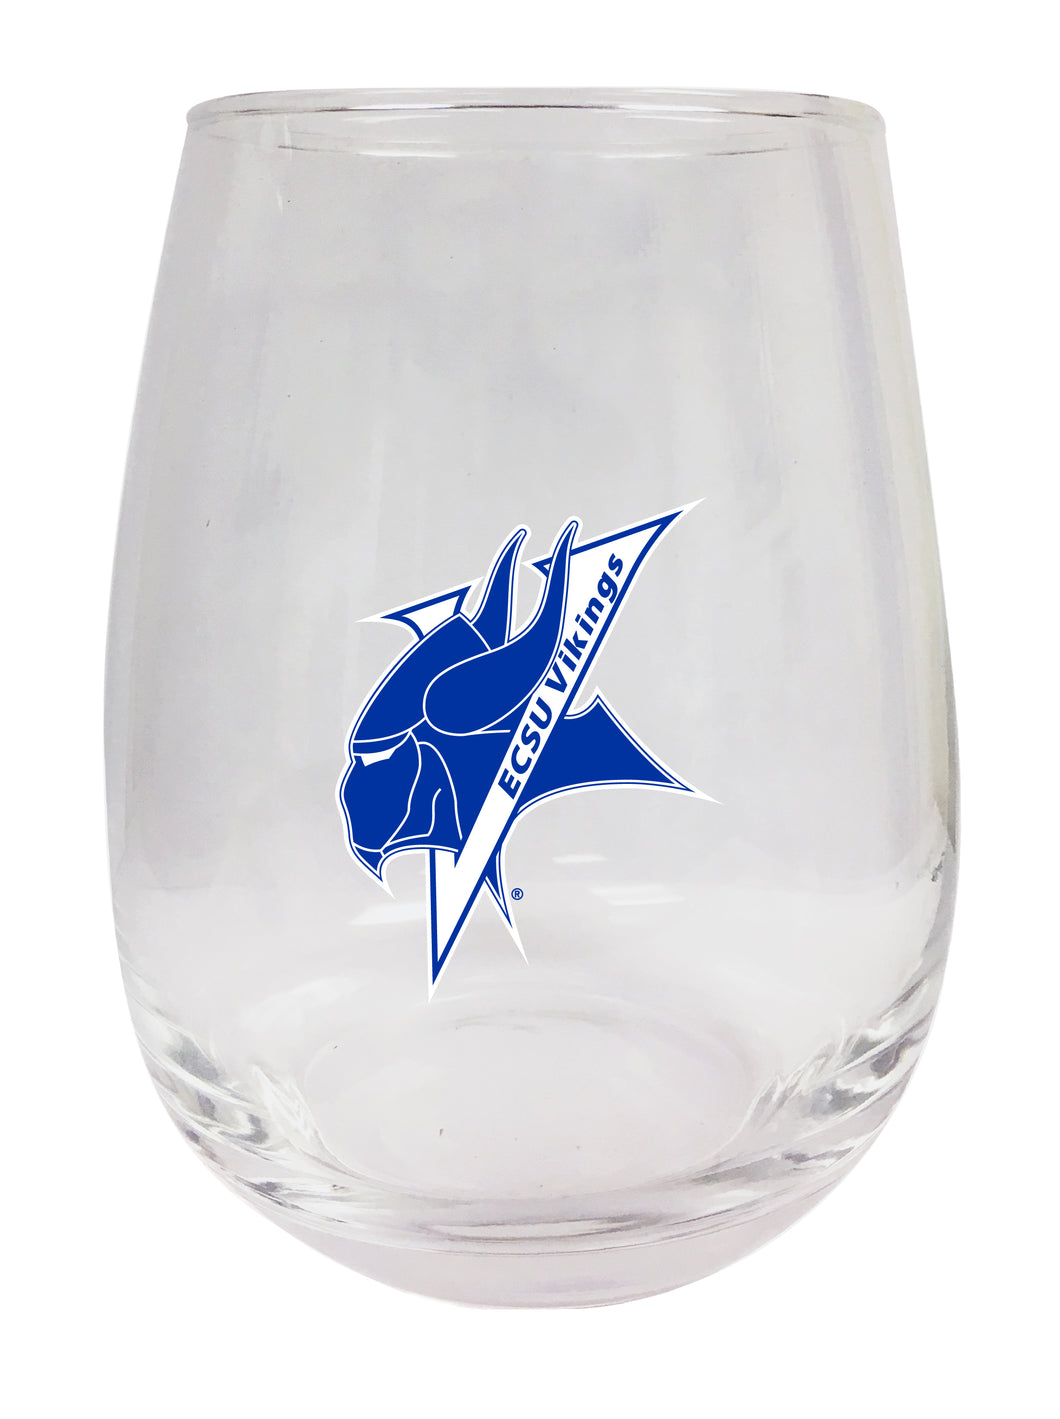 Elizabeth City State University Stemless Wine Glass - 9 oz. | Officially Licensed NCAA Merchandise